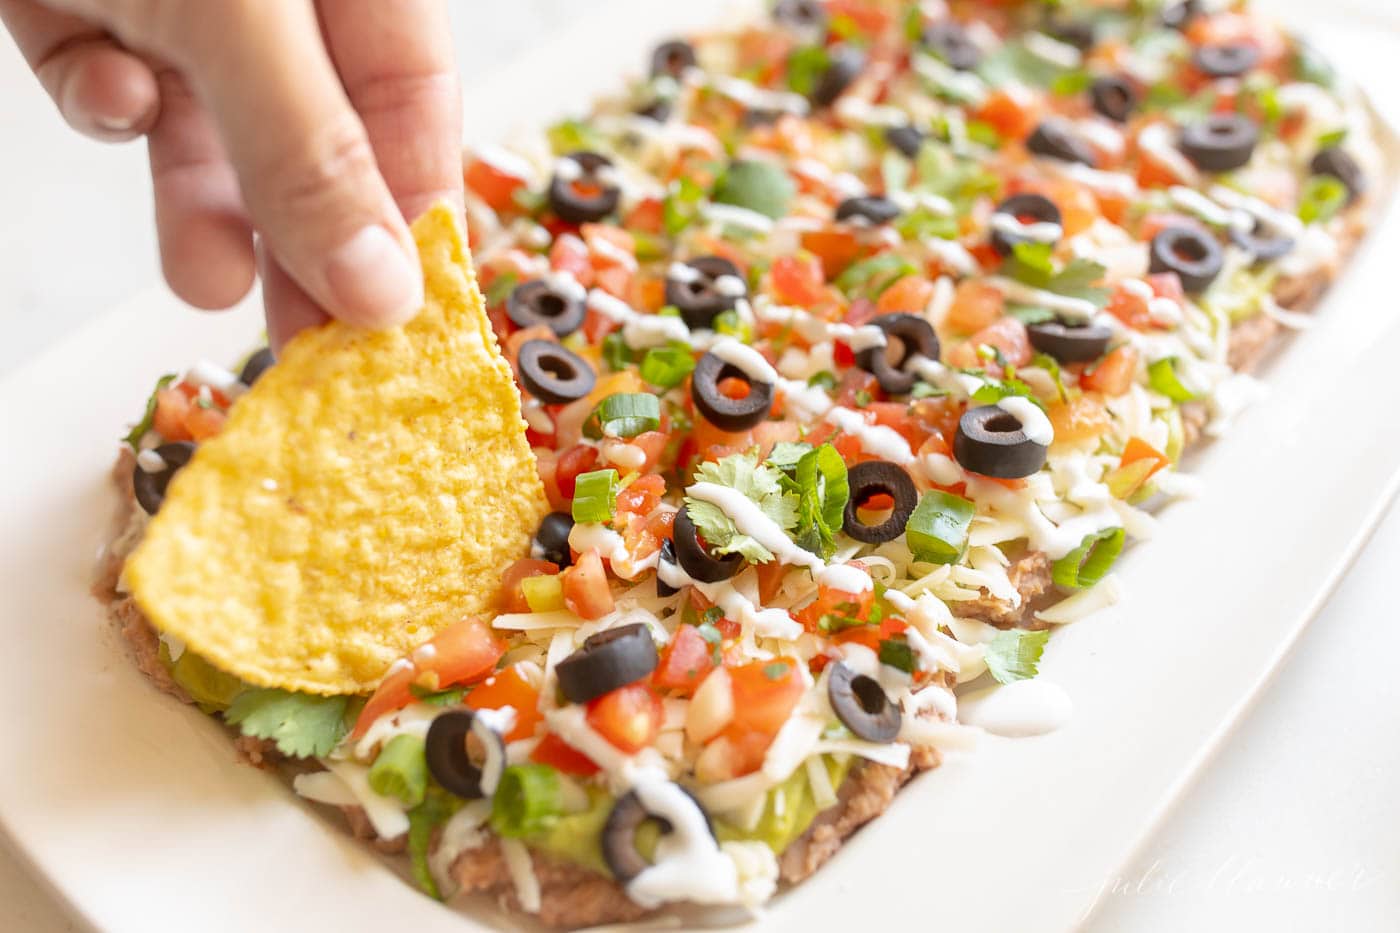 7 layer dip with refried beans, guacamole, pico de gallo, cilantro, green onions, olives and cheese.